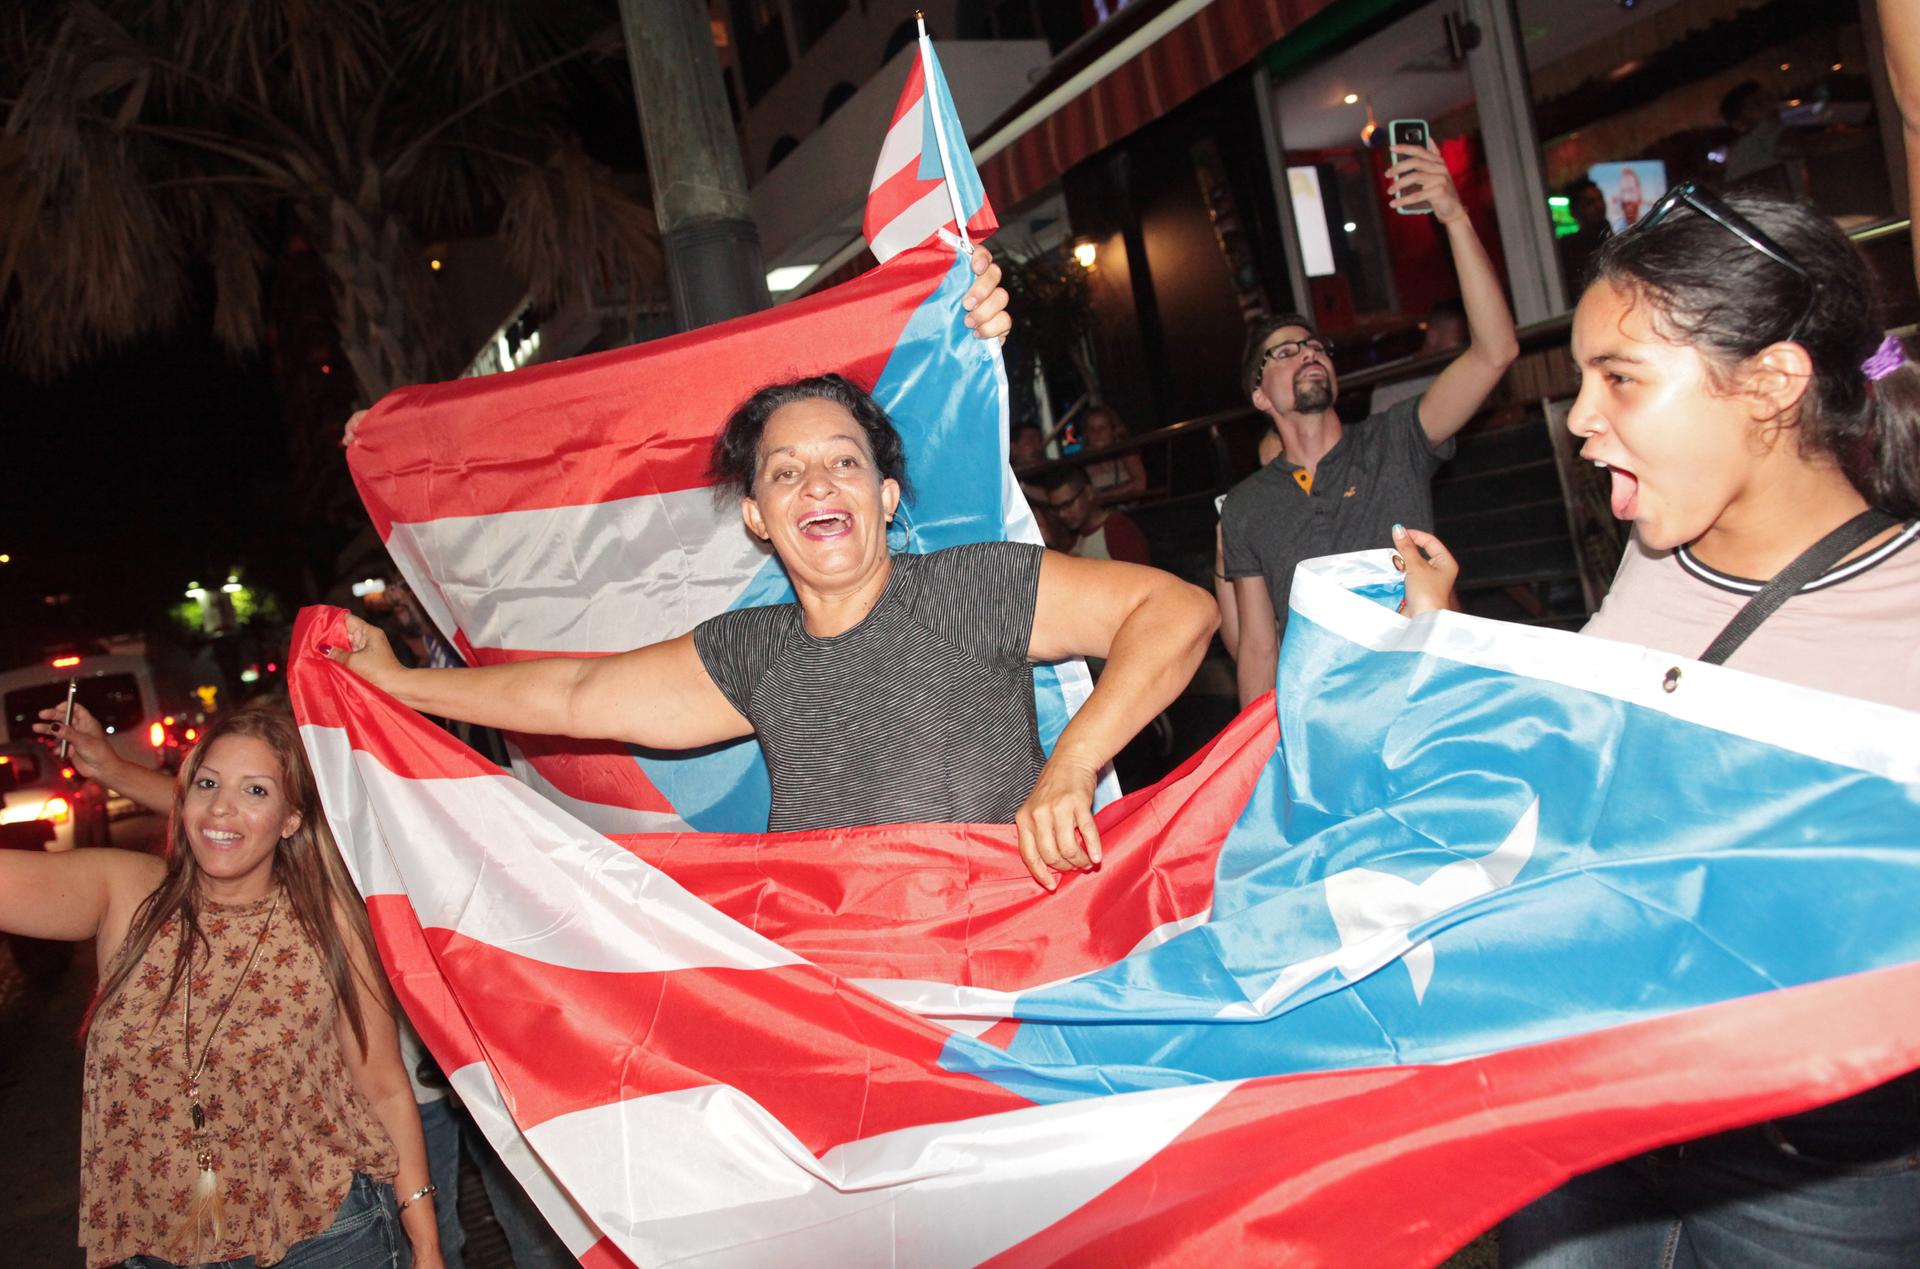 Puerto Ricans celebrate the gold medal won by Monica Puig (PUR) after she beat Angelique Kerber (GER) of Germany in the Rio Olympics. 